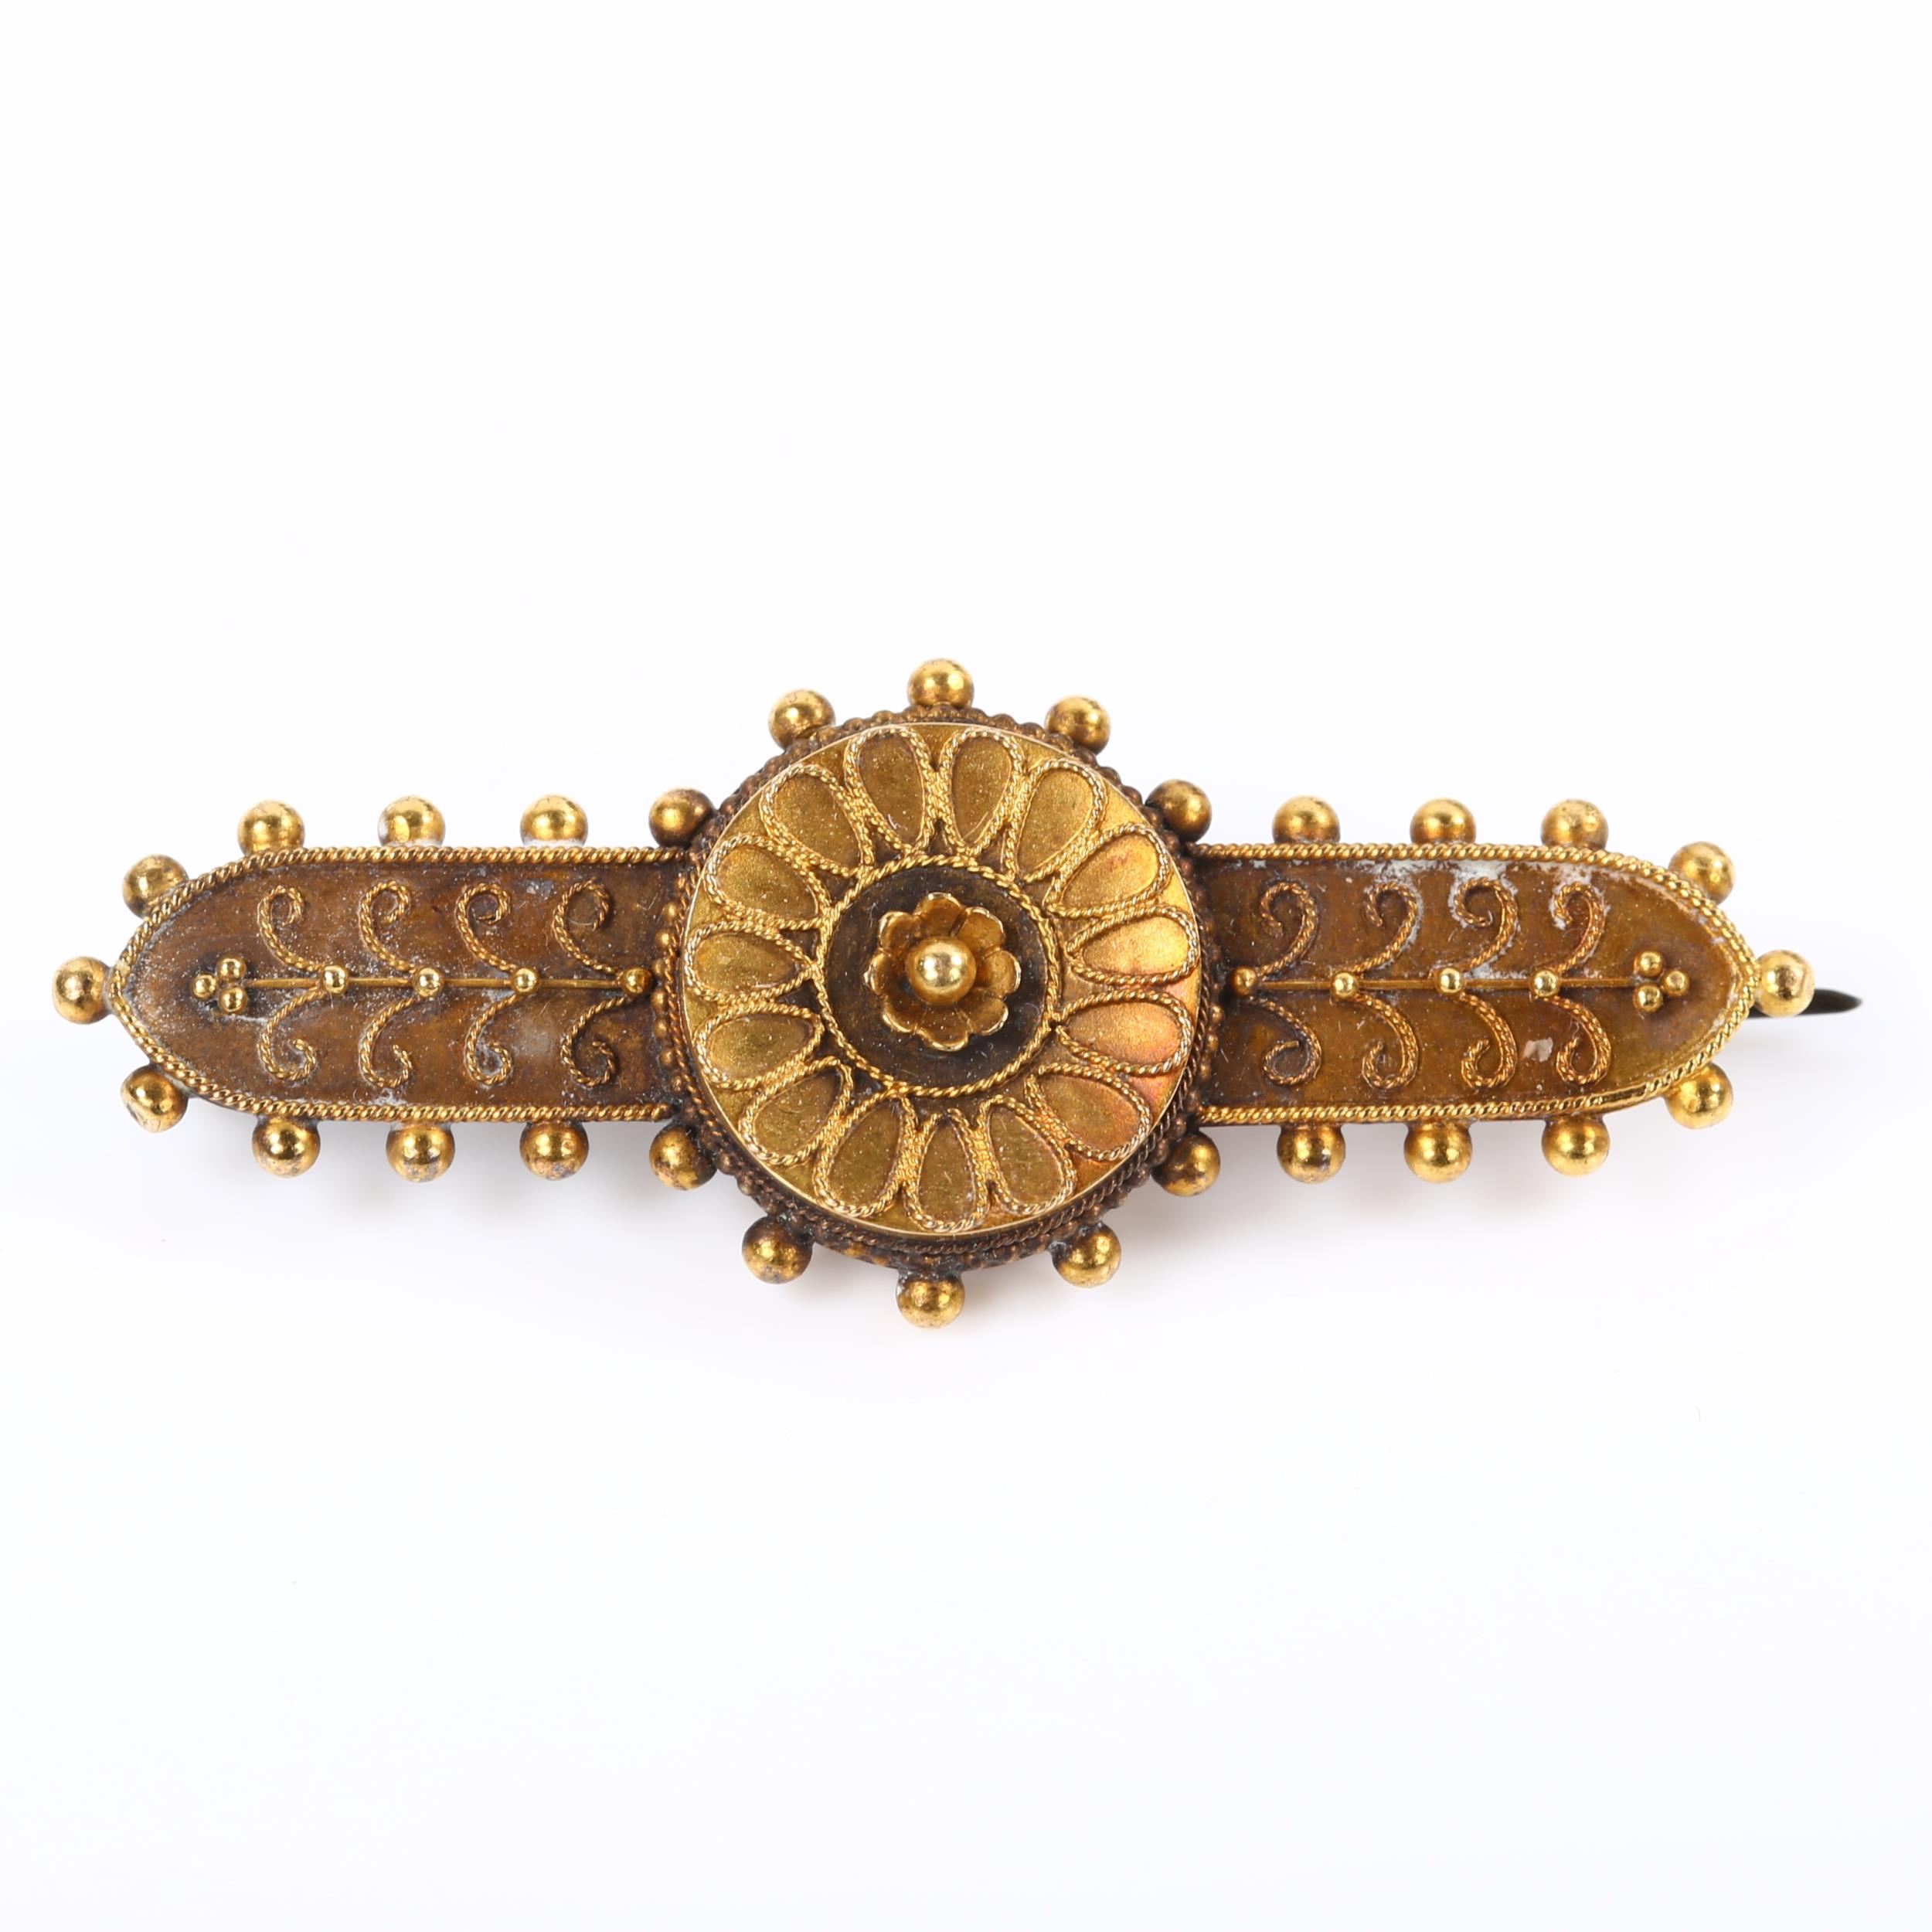 A Victorian 15ct gold Etruscan Revival brooch, with memorial inscription "In remembrance of 10 years